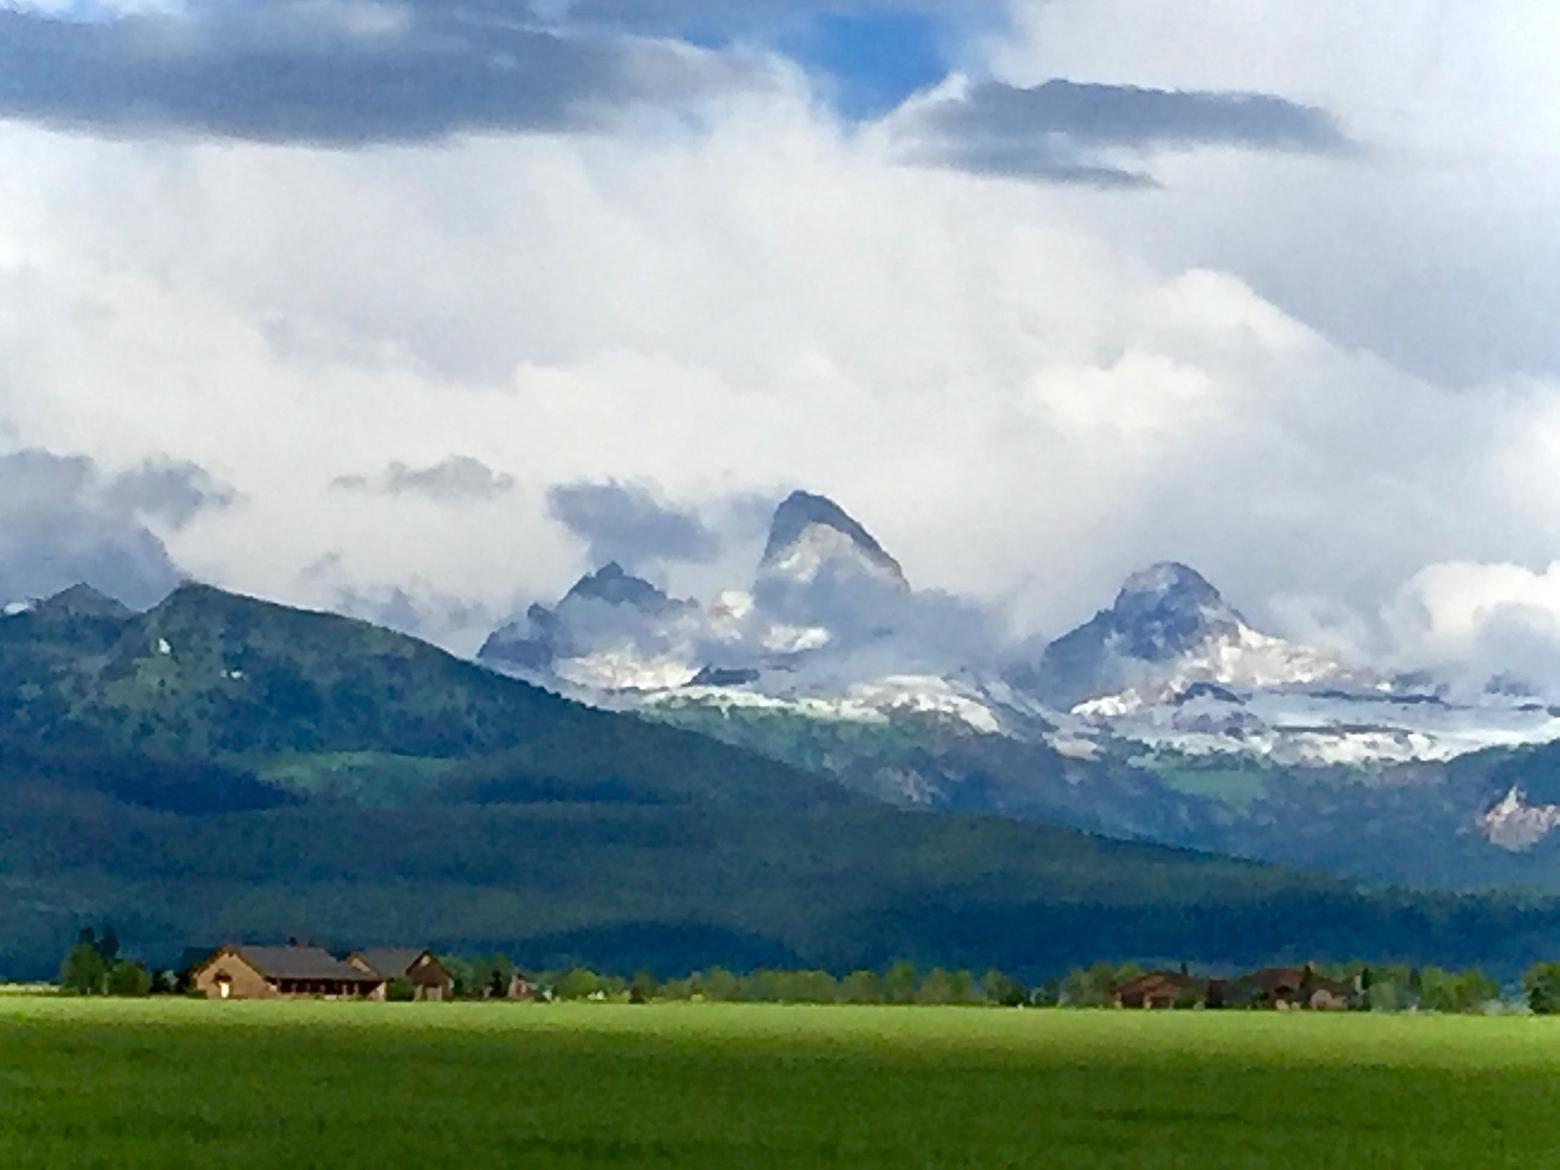 The western slopes of the Tetons as viewed from Teton County, Idaho which is coping with an inundation of newcomers and people who work across the mountains in Jackson Hole but cannot afford to live there. Photo by Todd Wilkinson